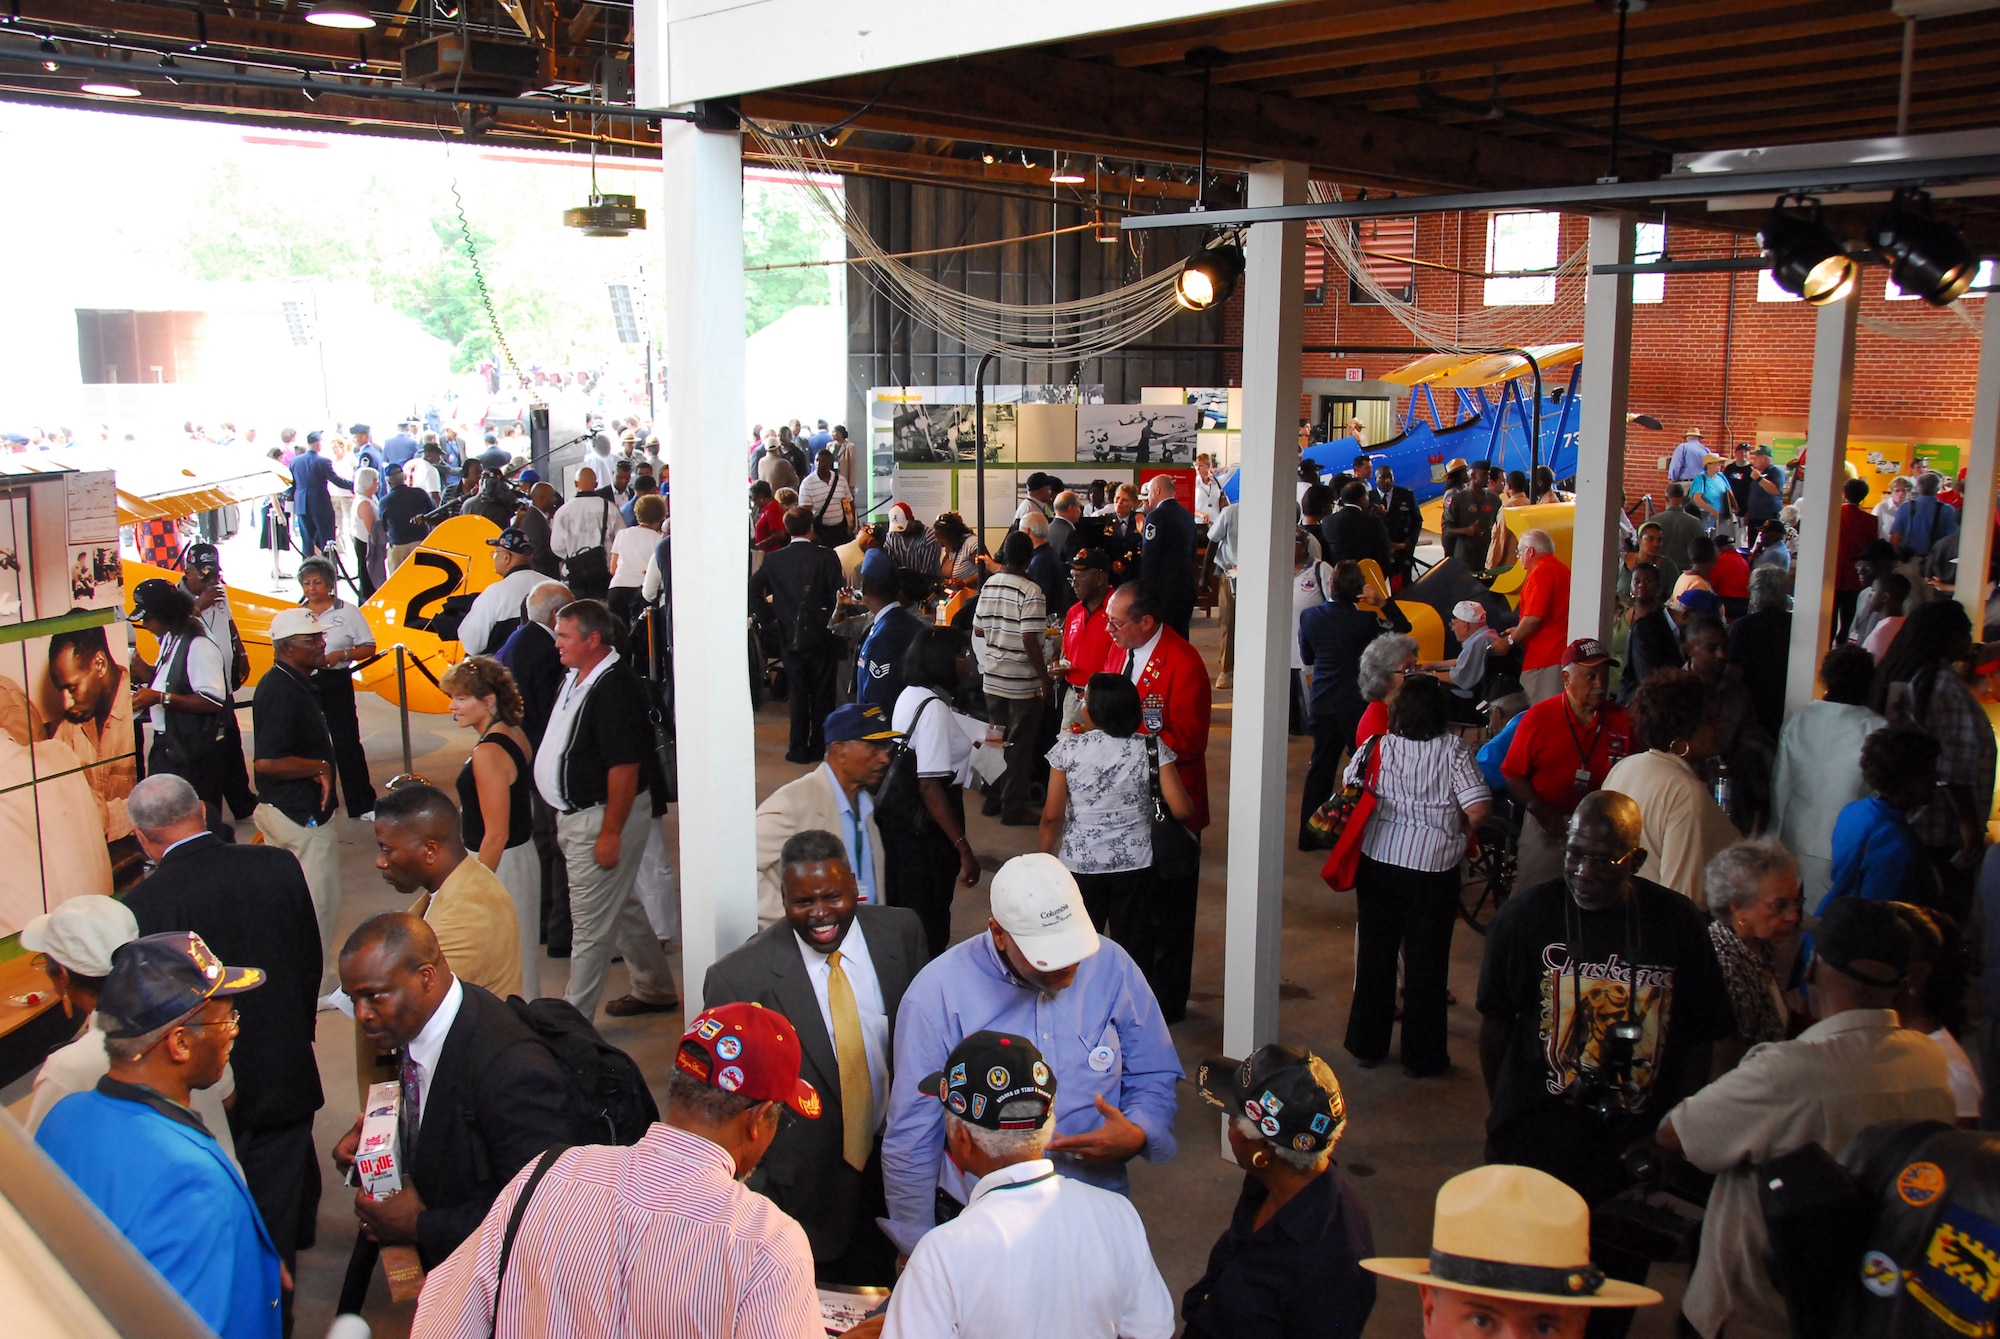 After the opening ceremony of the Tuskegee Airmen National Historic Site Oct. 10 at Moton Field, Ala., visitors explore the interpretive and static displays housed the in the only remaining original hangar of the "Tuskegee Experience." (Air Force photo by Scott Knuteson)